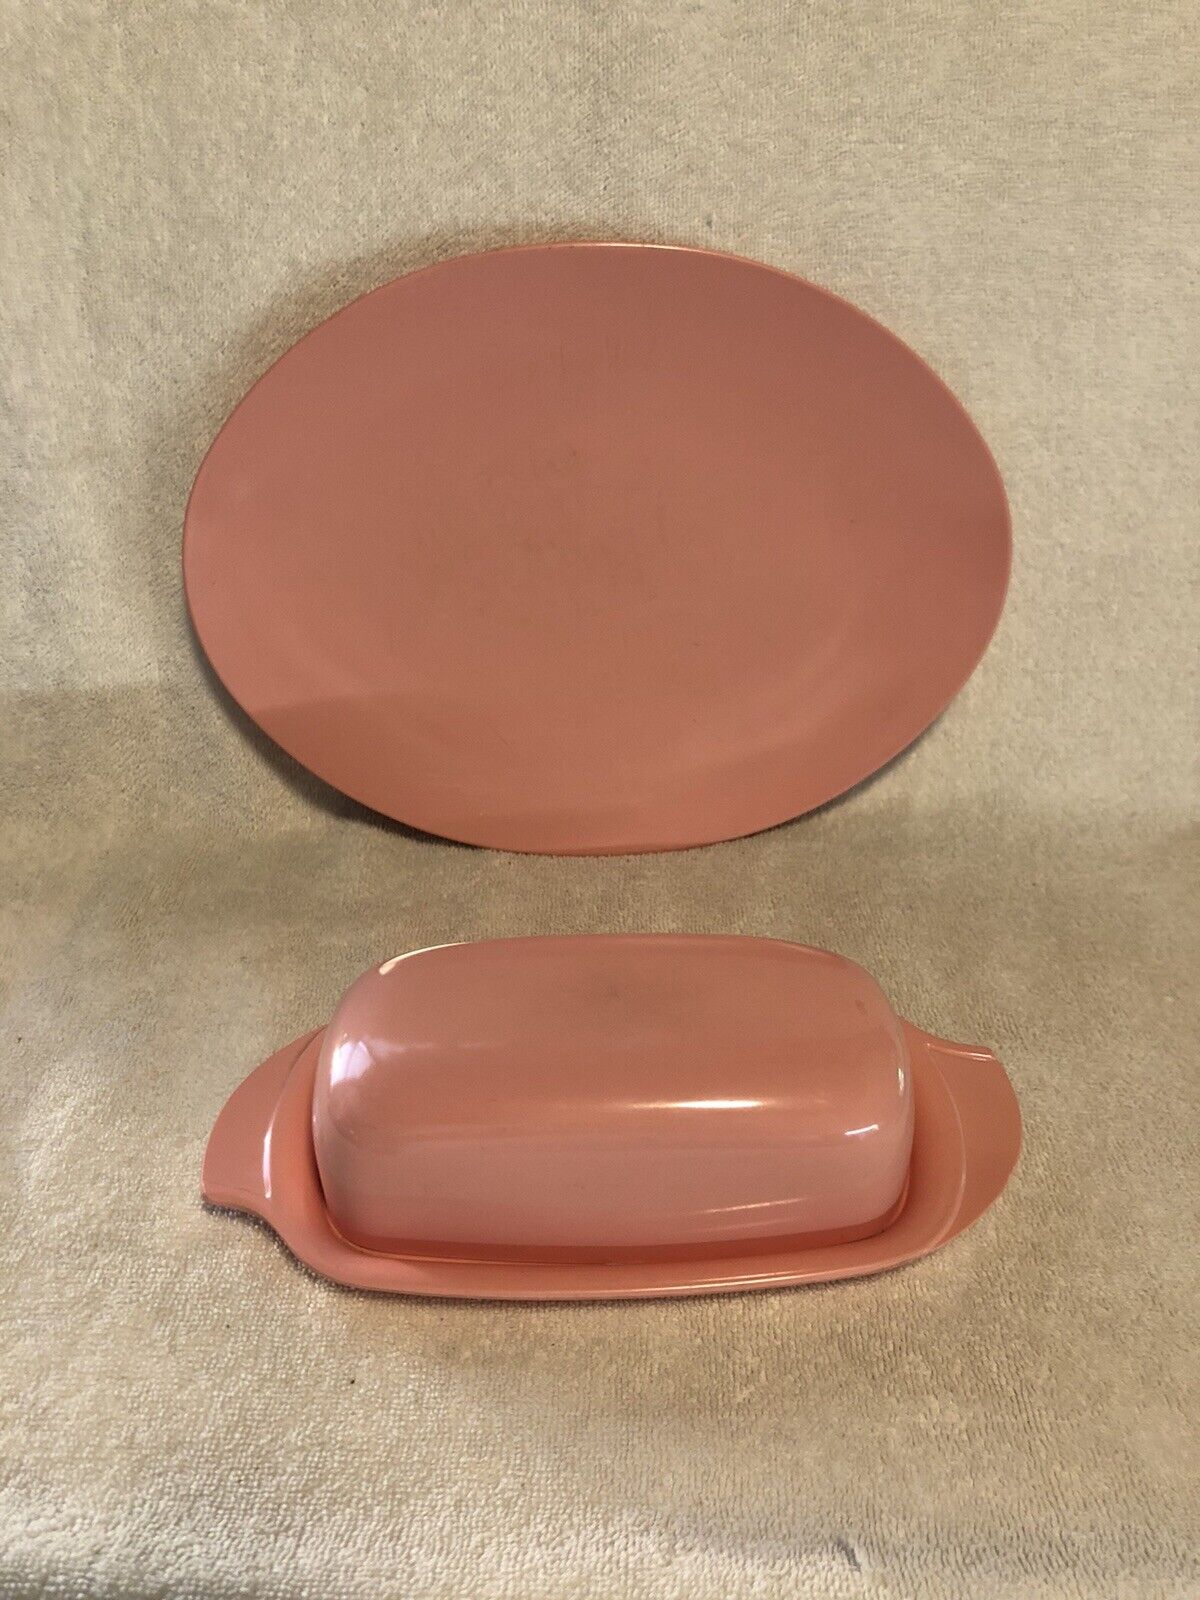 Vtg Boonton Pink Covered Butter Dish and Serving Plate 